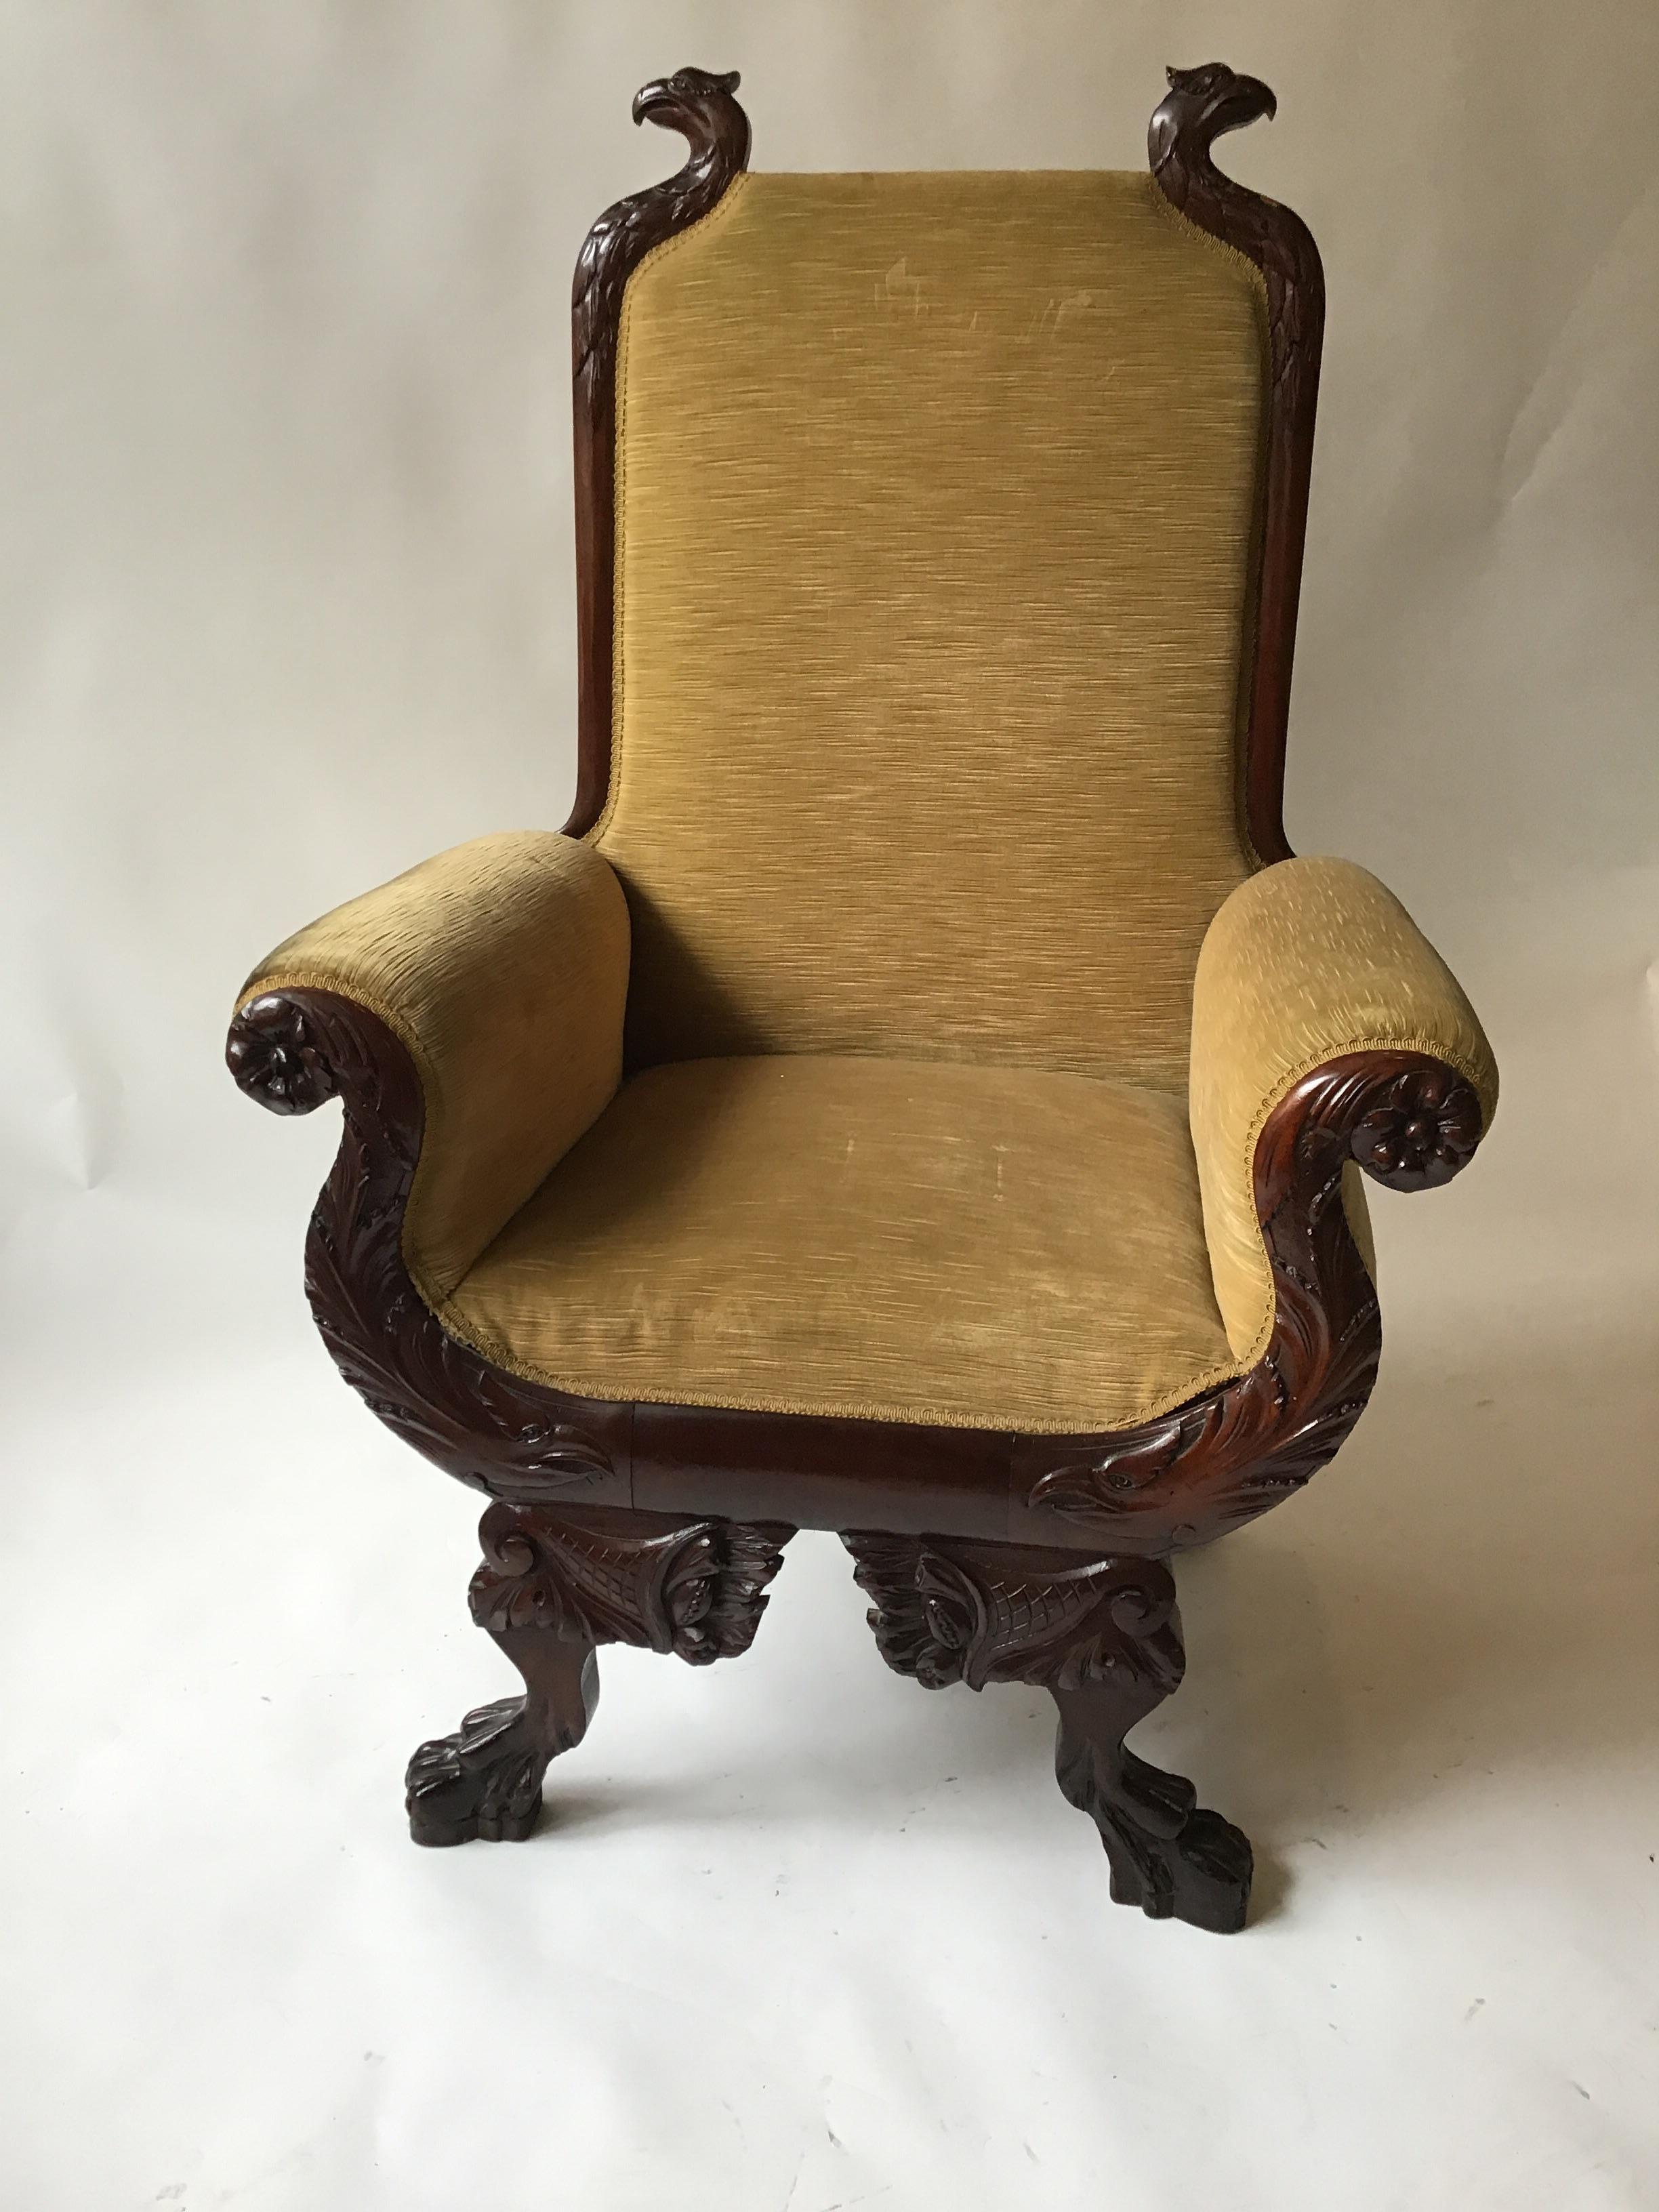 1870s federal carved wood eagle throne chair from the Jay Gould estate. This oversized chair is wonderful, carved eagles adorn the top and base of the chair. Great big lion paw feet.